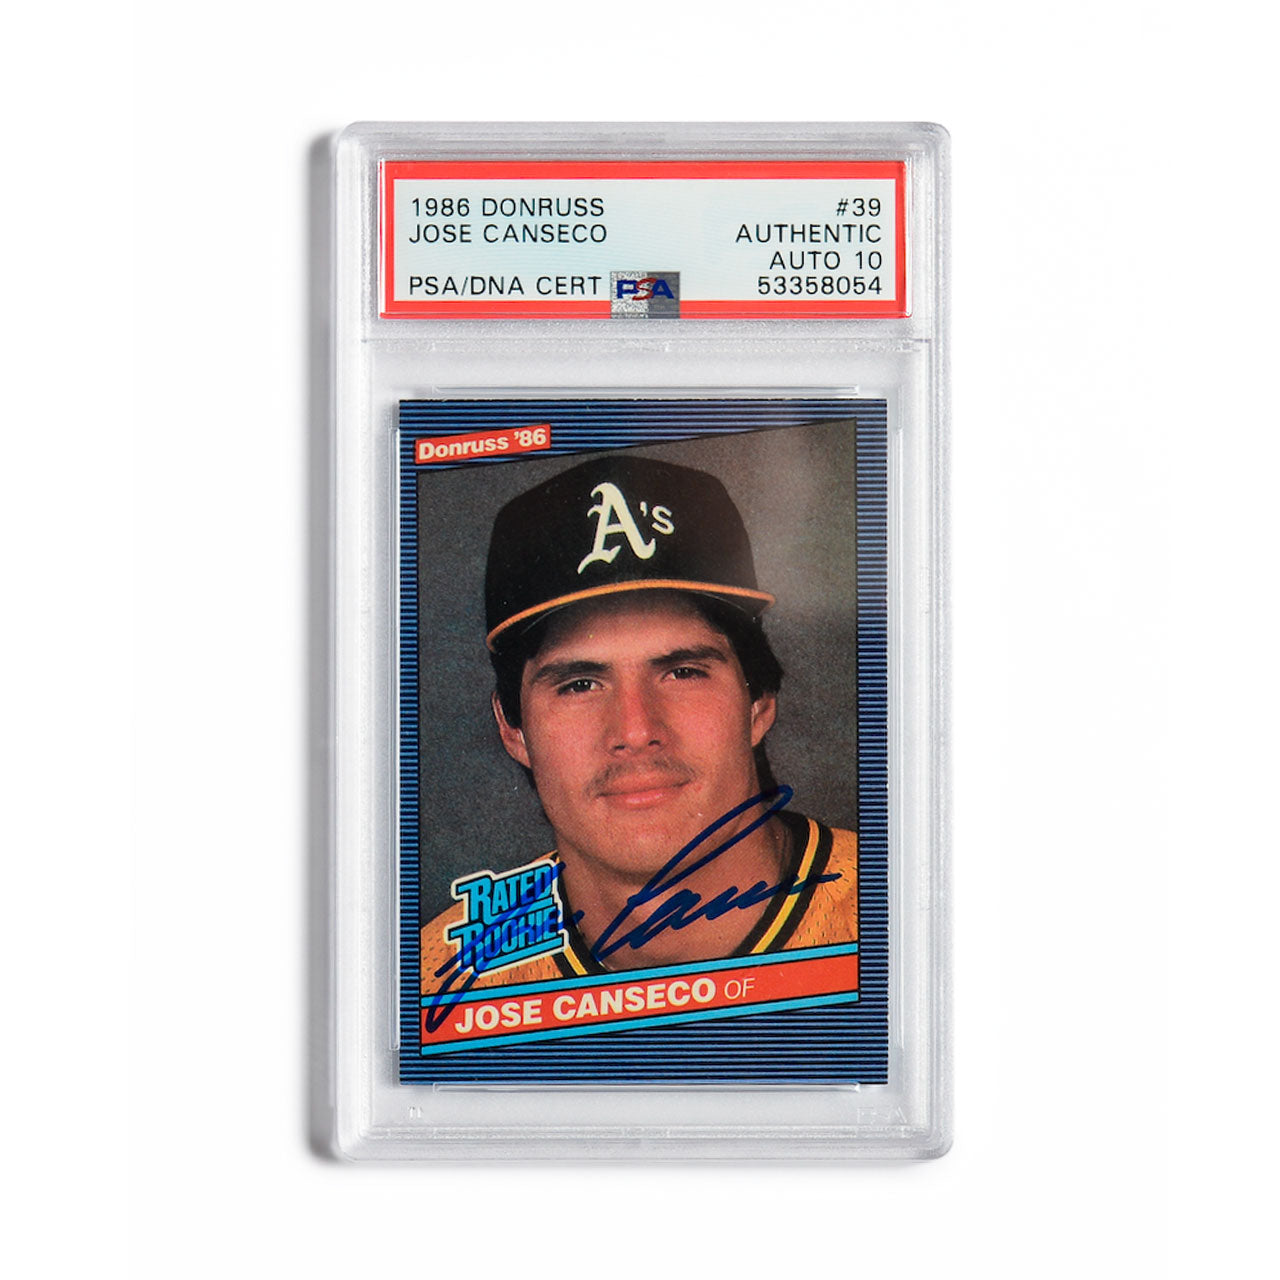 1986 Donruss Jose Canseco Autographed Rookie Card